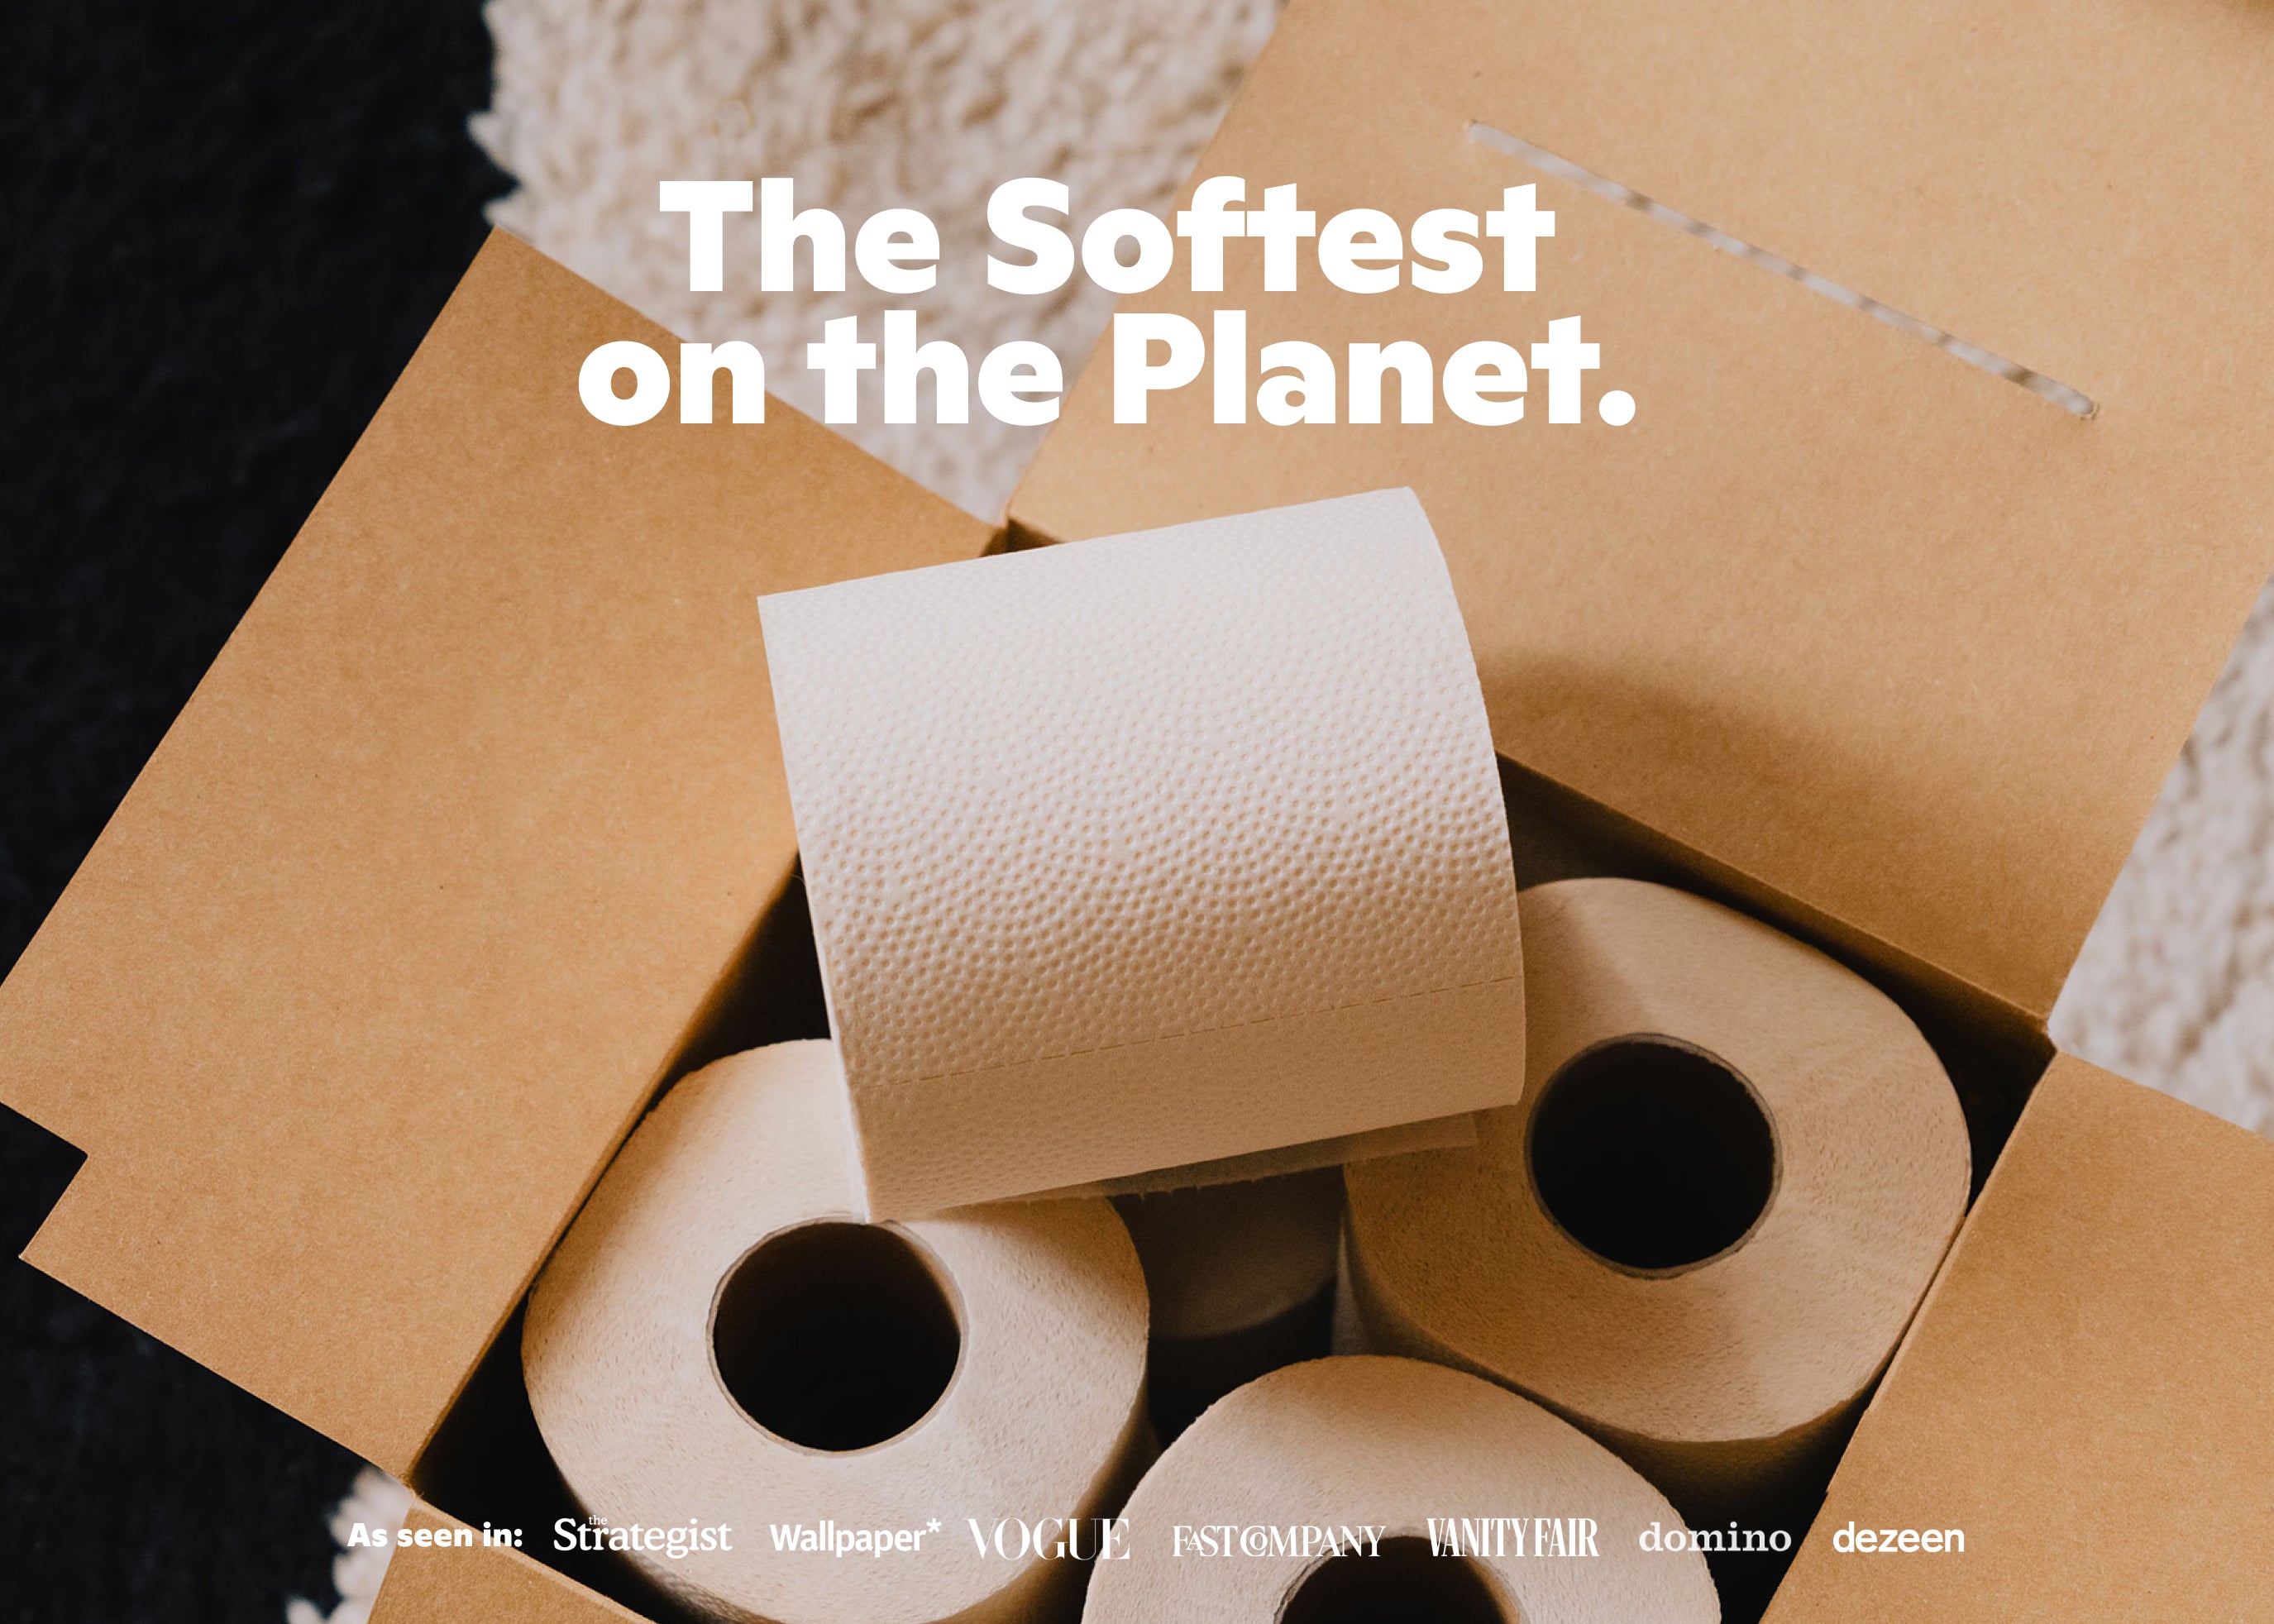 Designer Toilet Paper Companies That Are Also Sustainable and Plastic-Free